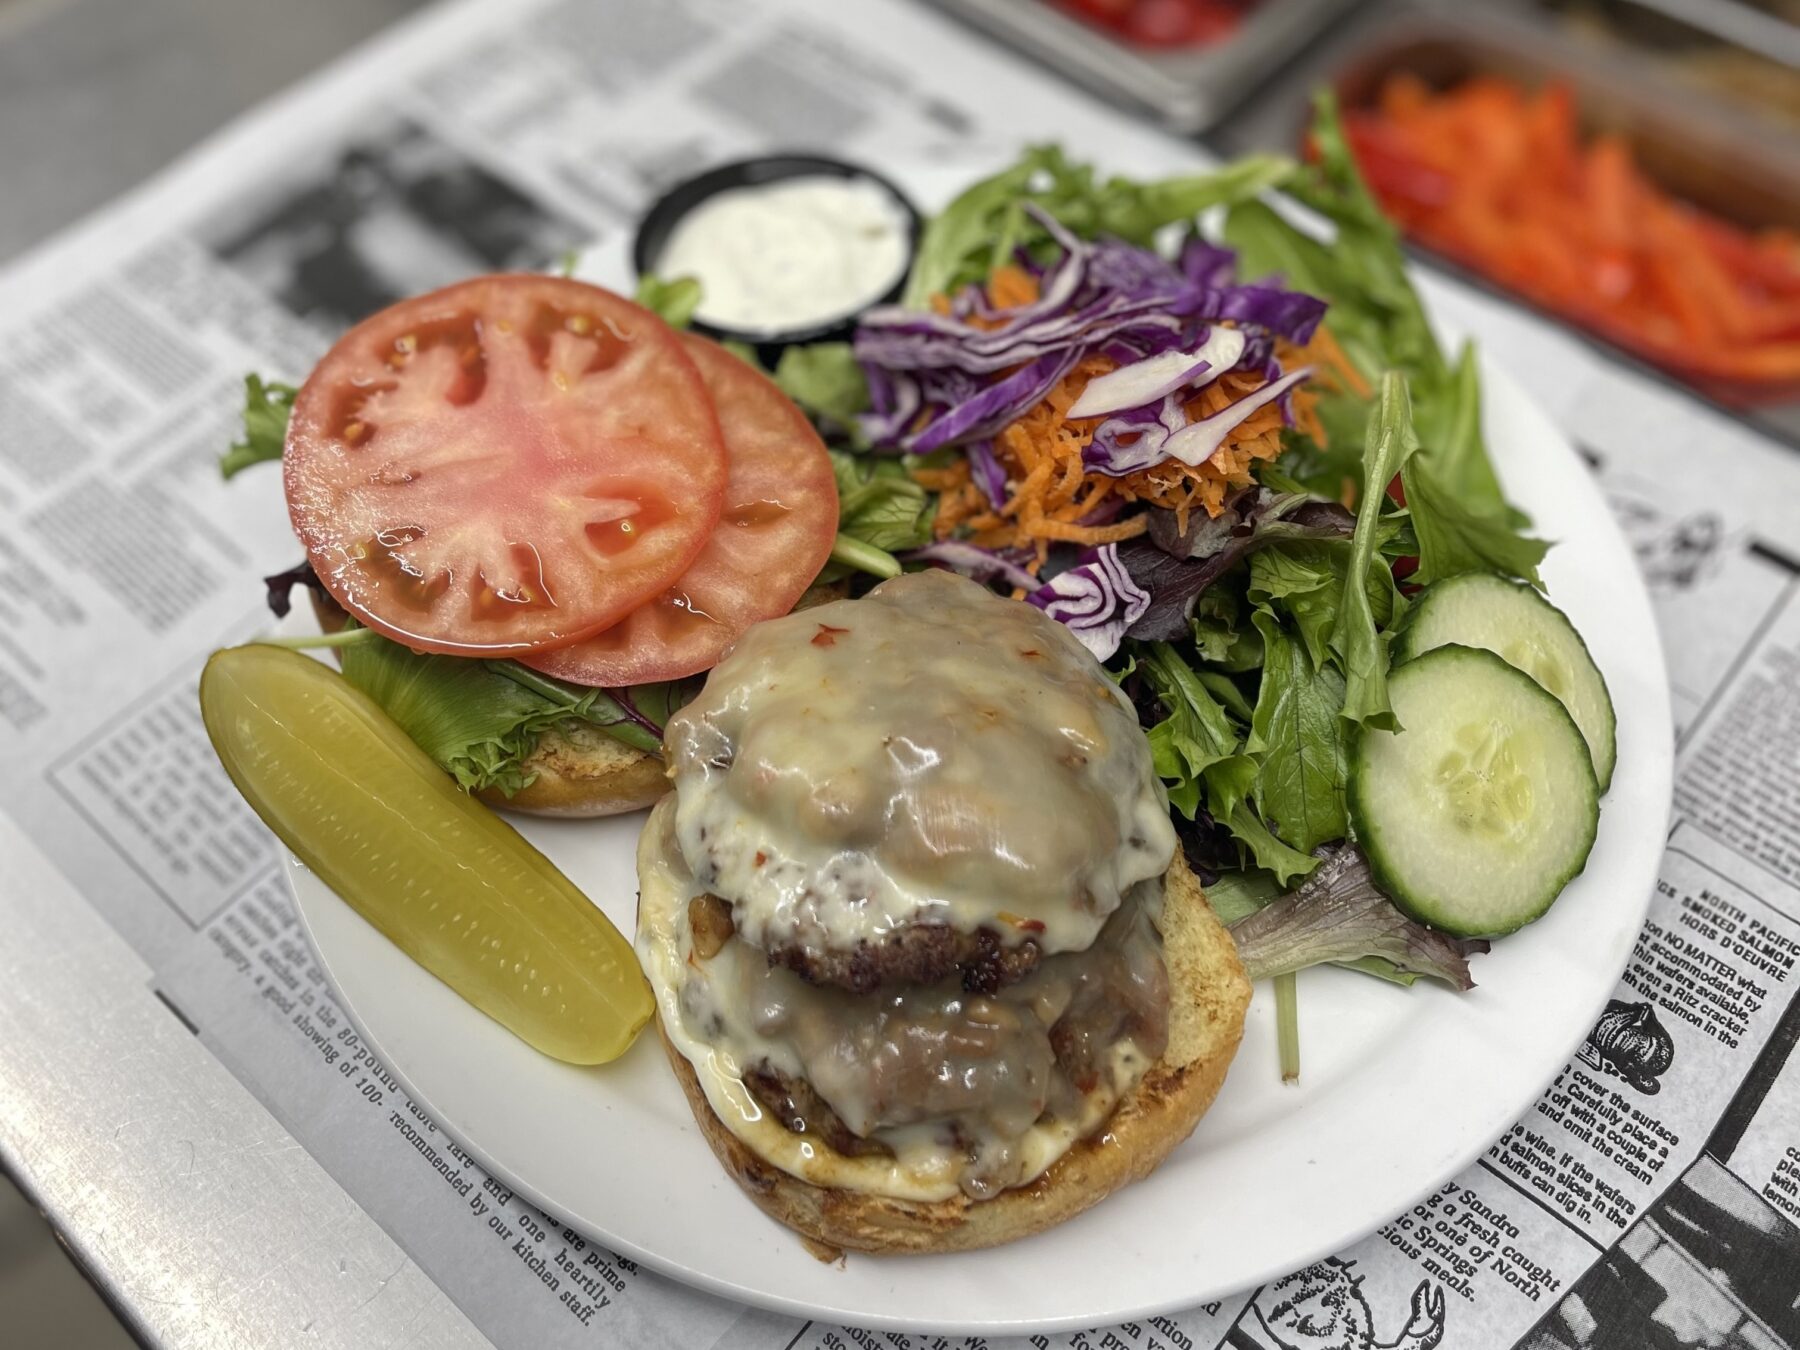 The Jack burger with a side garden salad.